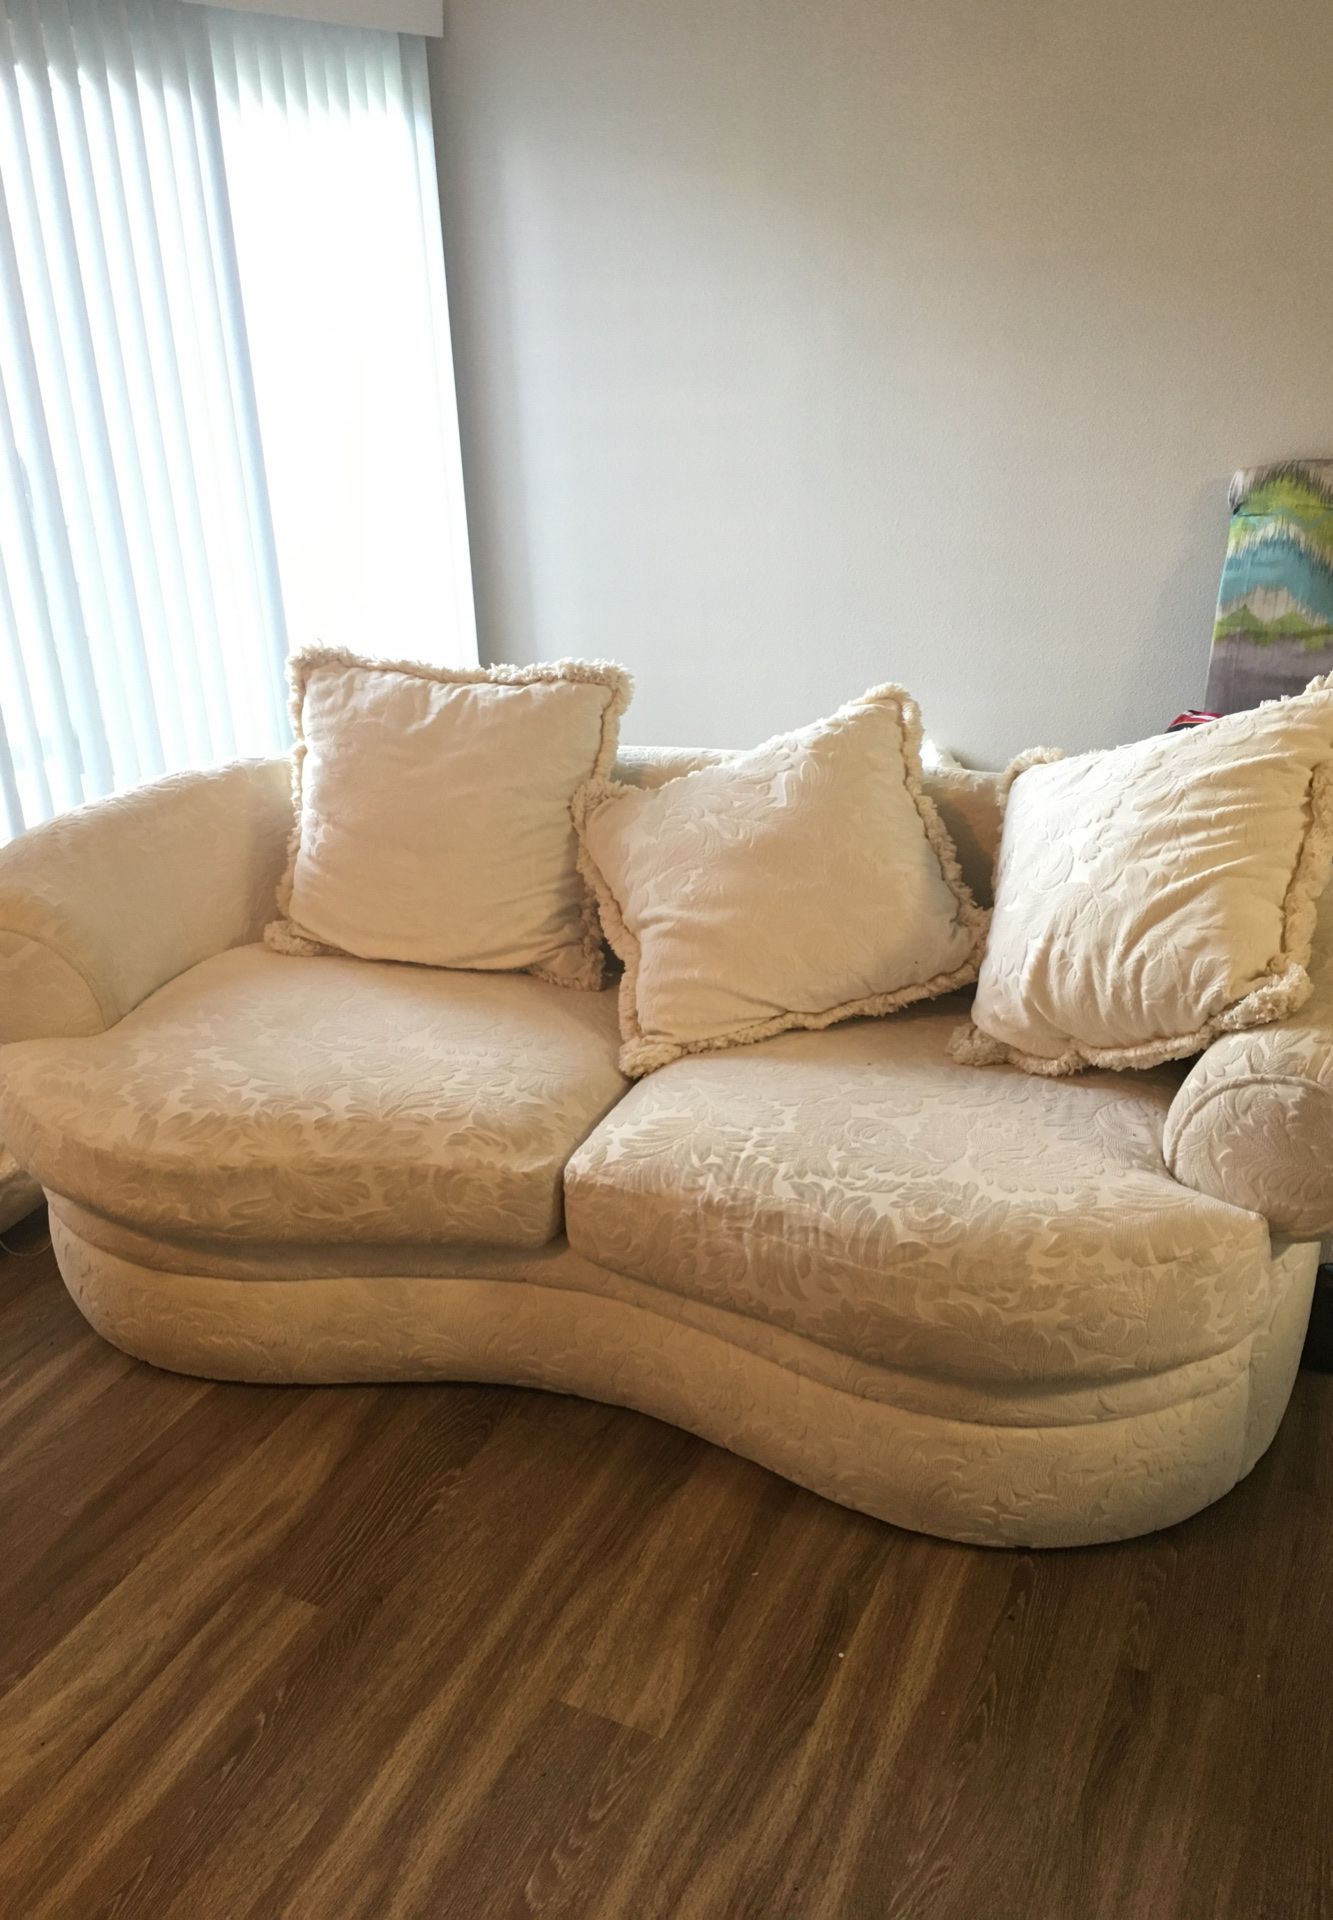 Free Sofa(Needs Cleaning)